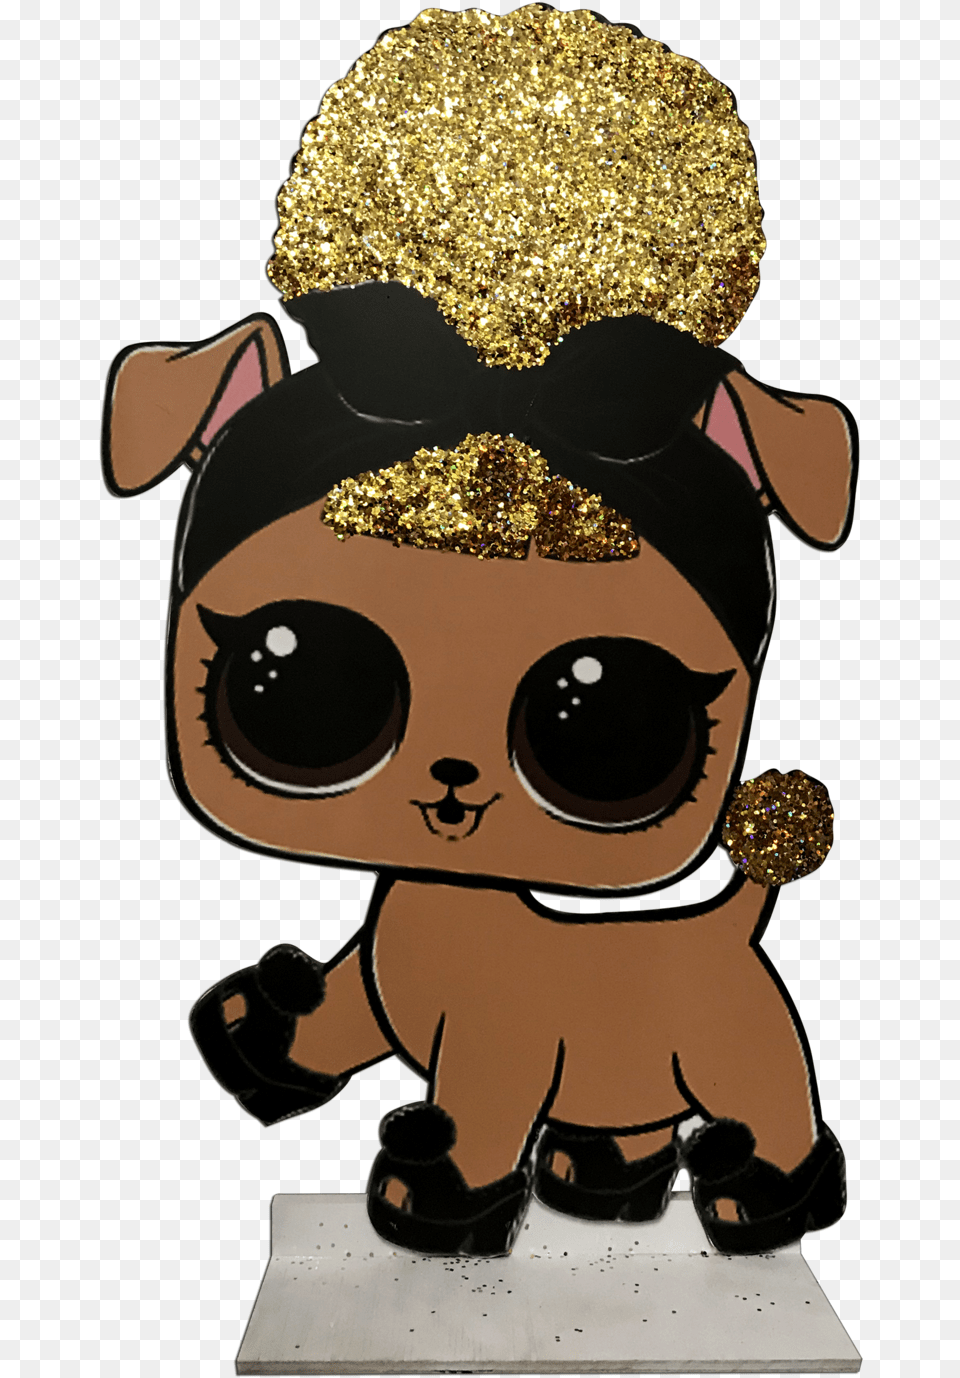 Lol Surprise Doll Pup Bee Lol Surprise Dolls Puppy Queen Bee Lol Doll, Person Free Transparent Png